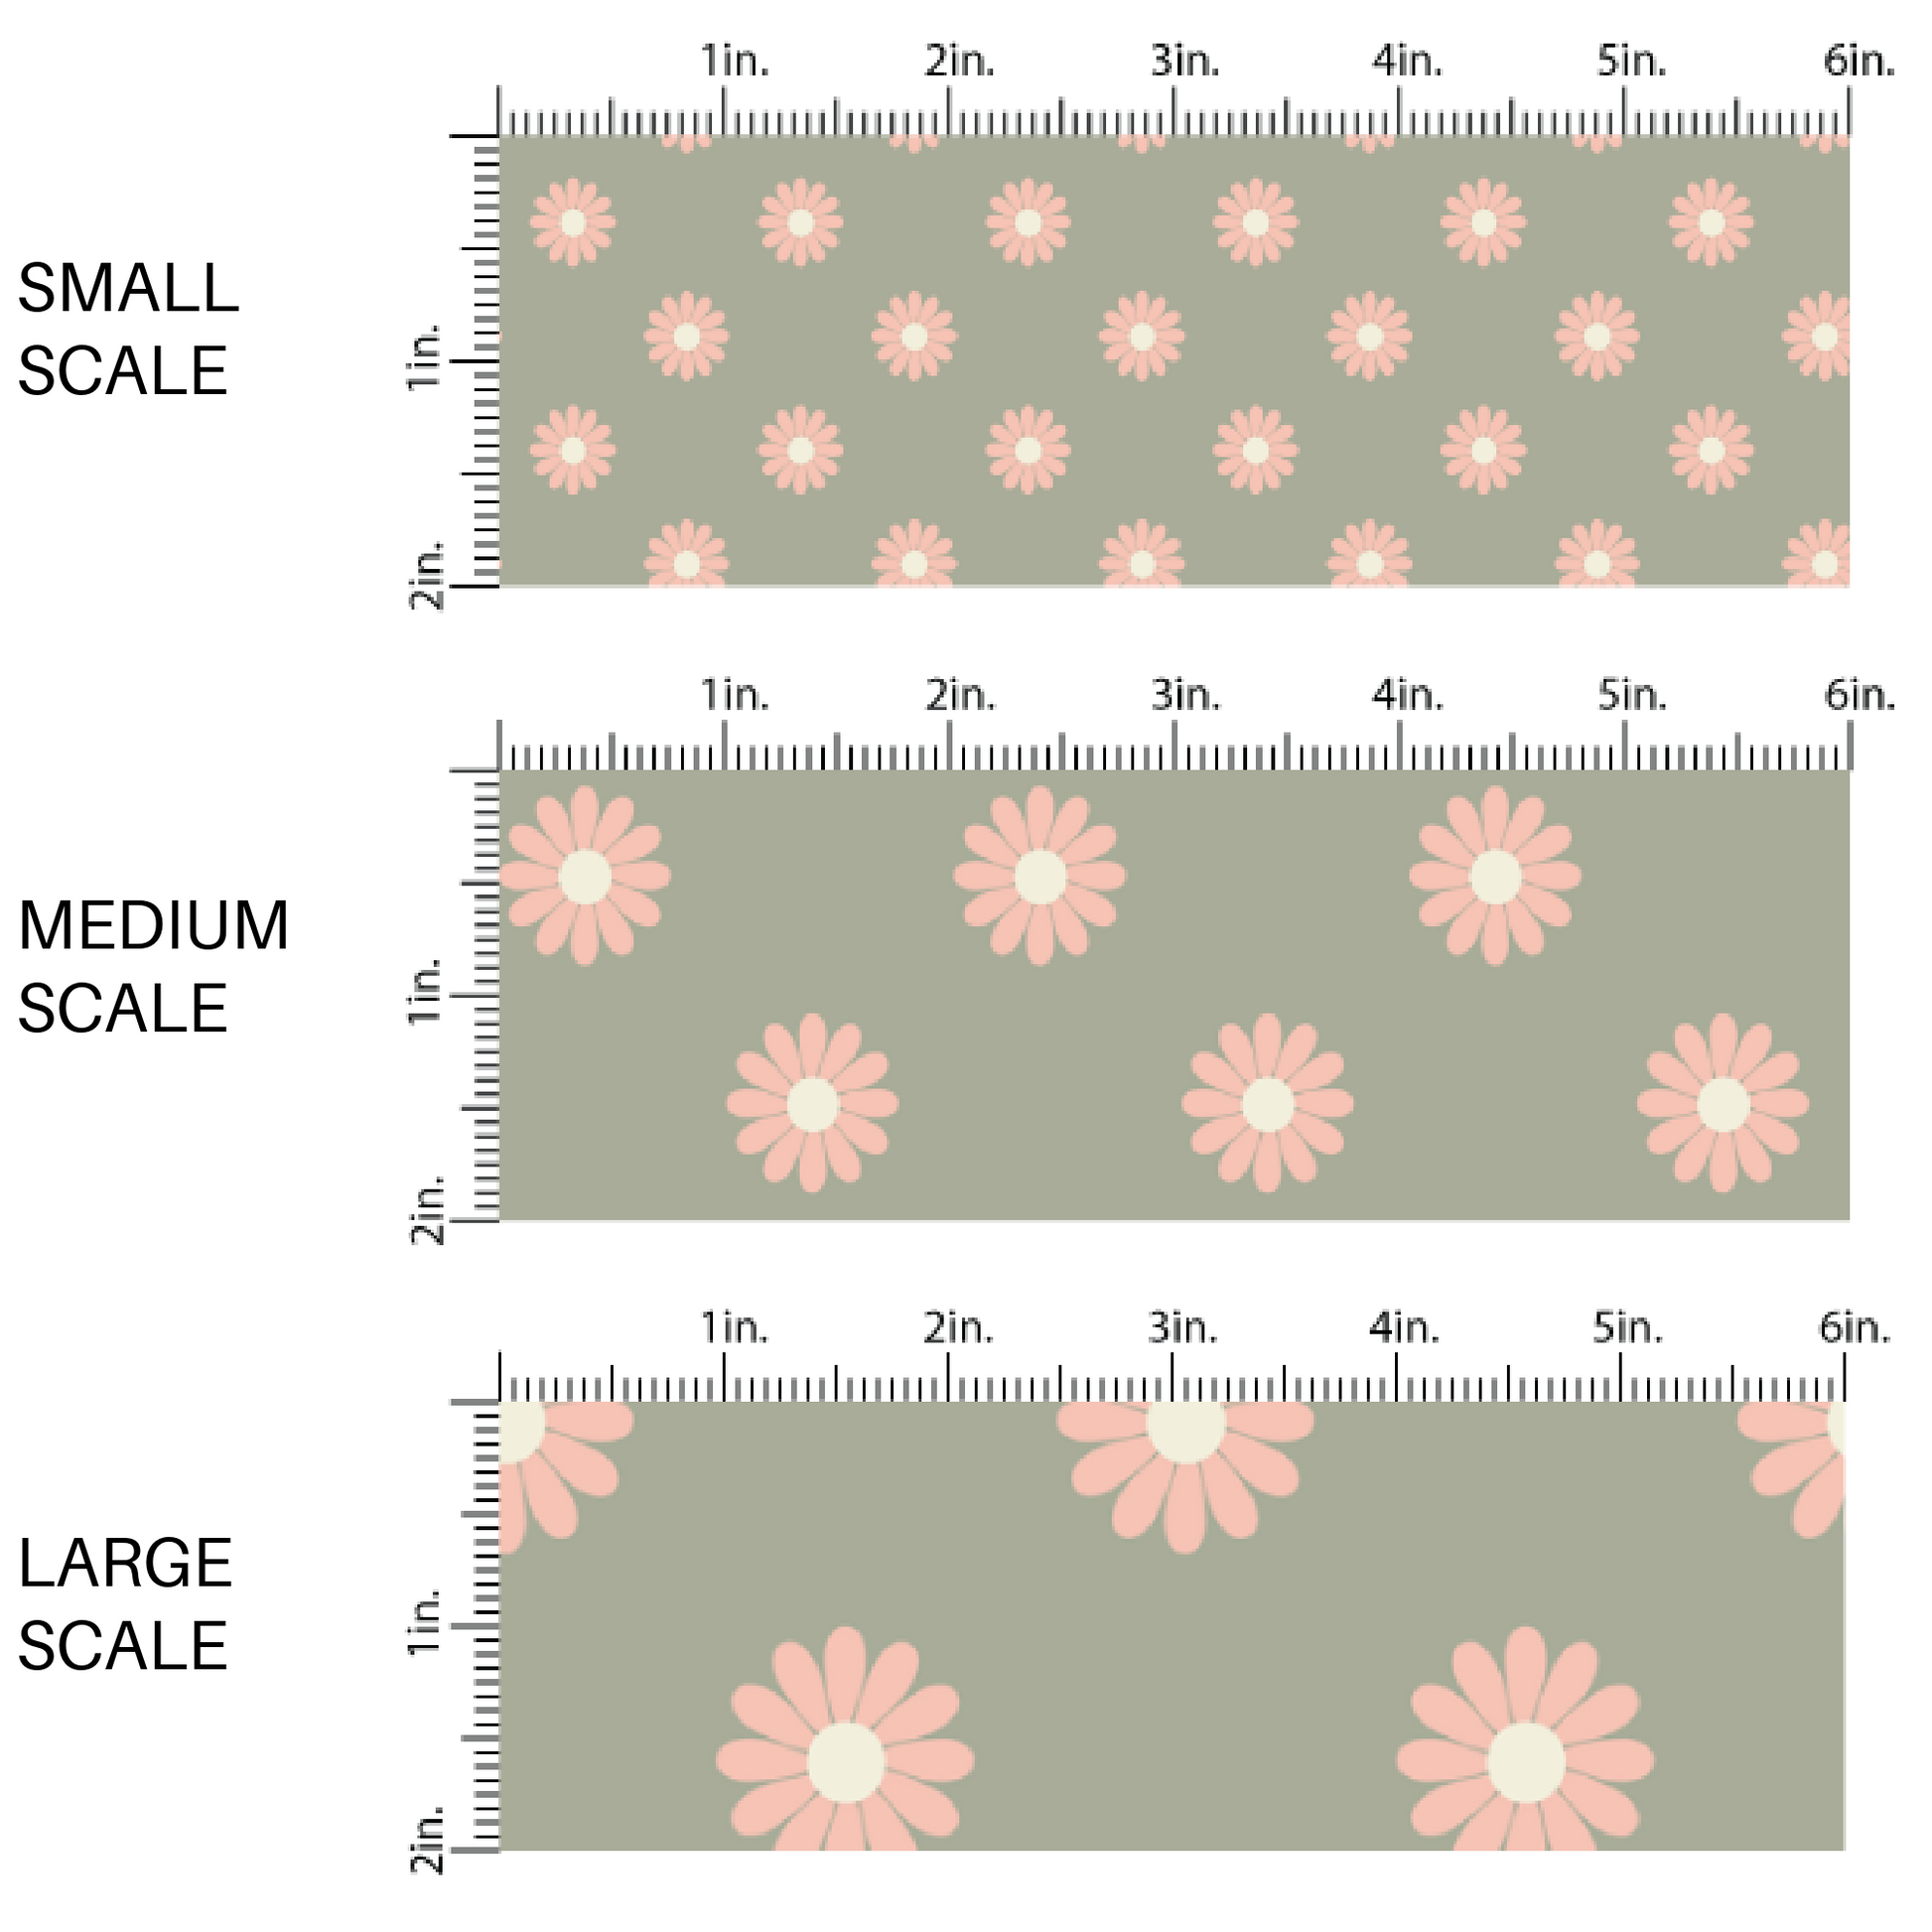 Sage green fabric by the yard scaled image guide with peach colored daisies